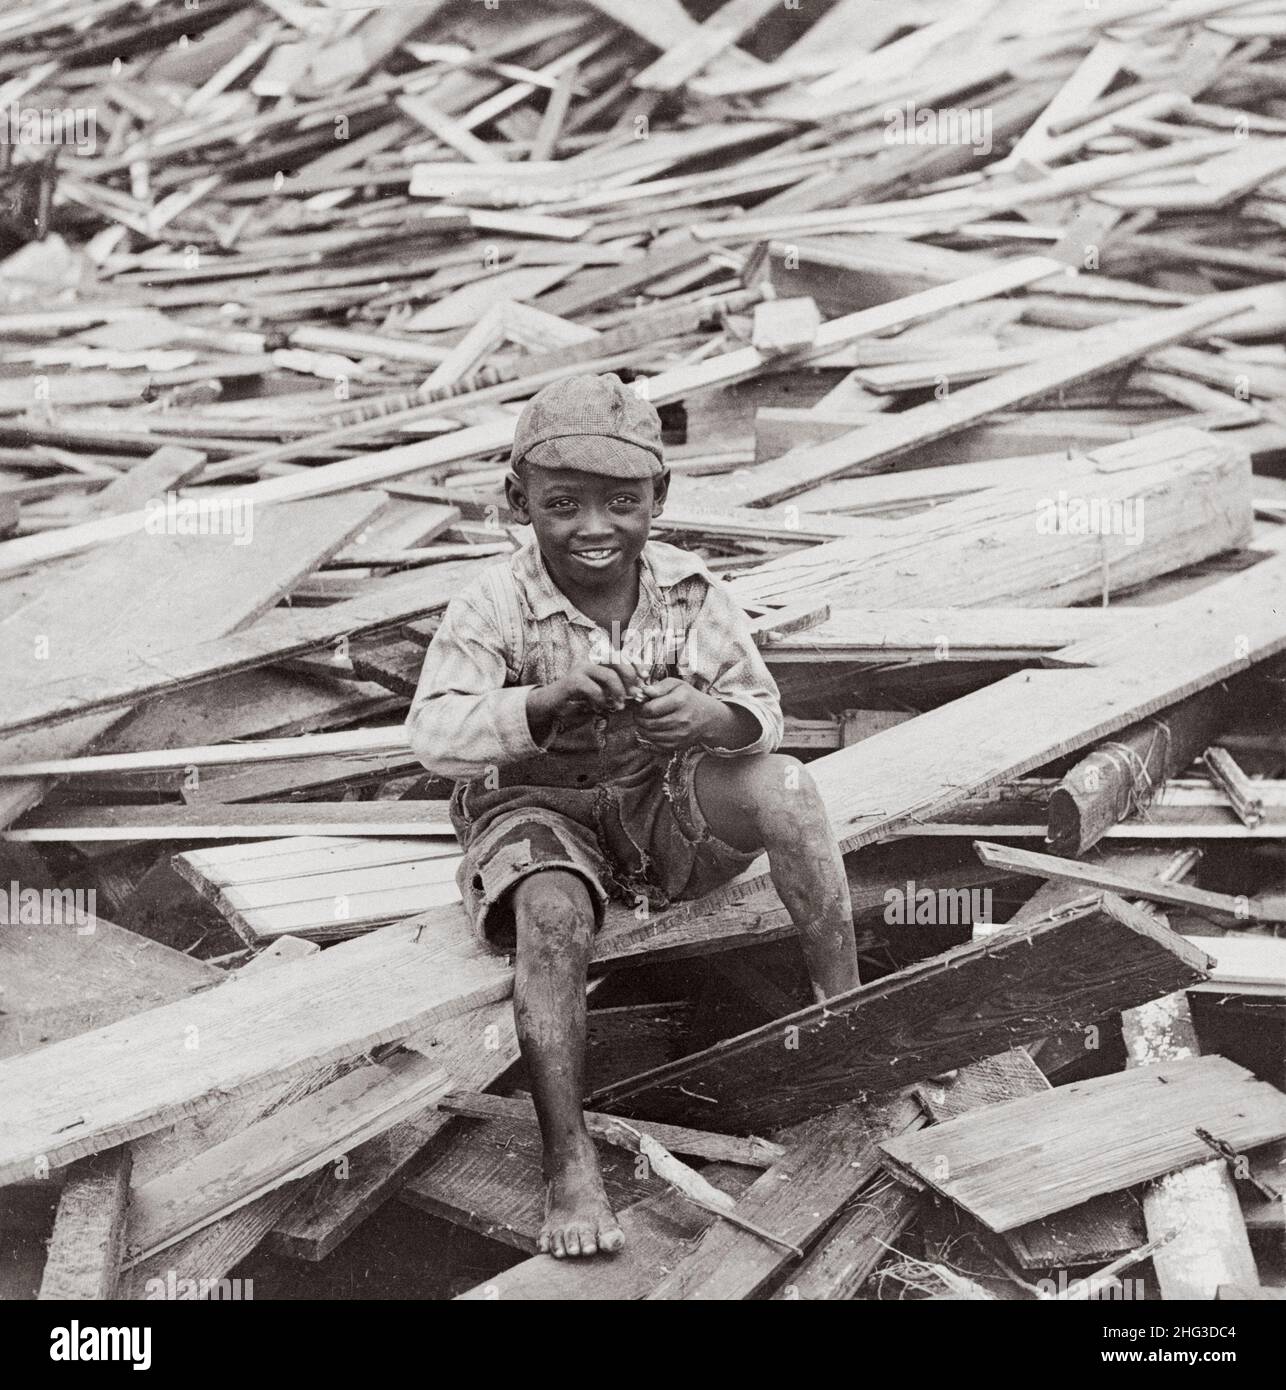 Archival photo of 1900 Galveston hurricane. A surviving African American boy sits among the debris caused by the hurricane. Galveston, Texas. USA. Oct Stock Photo